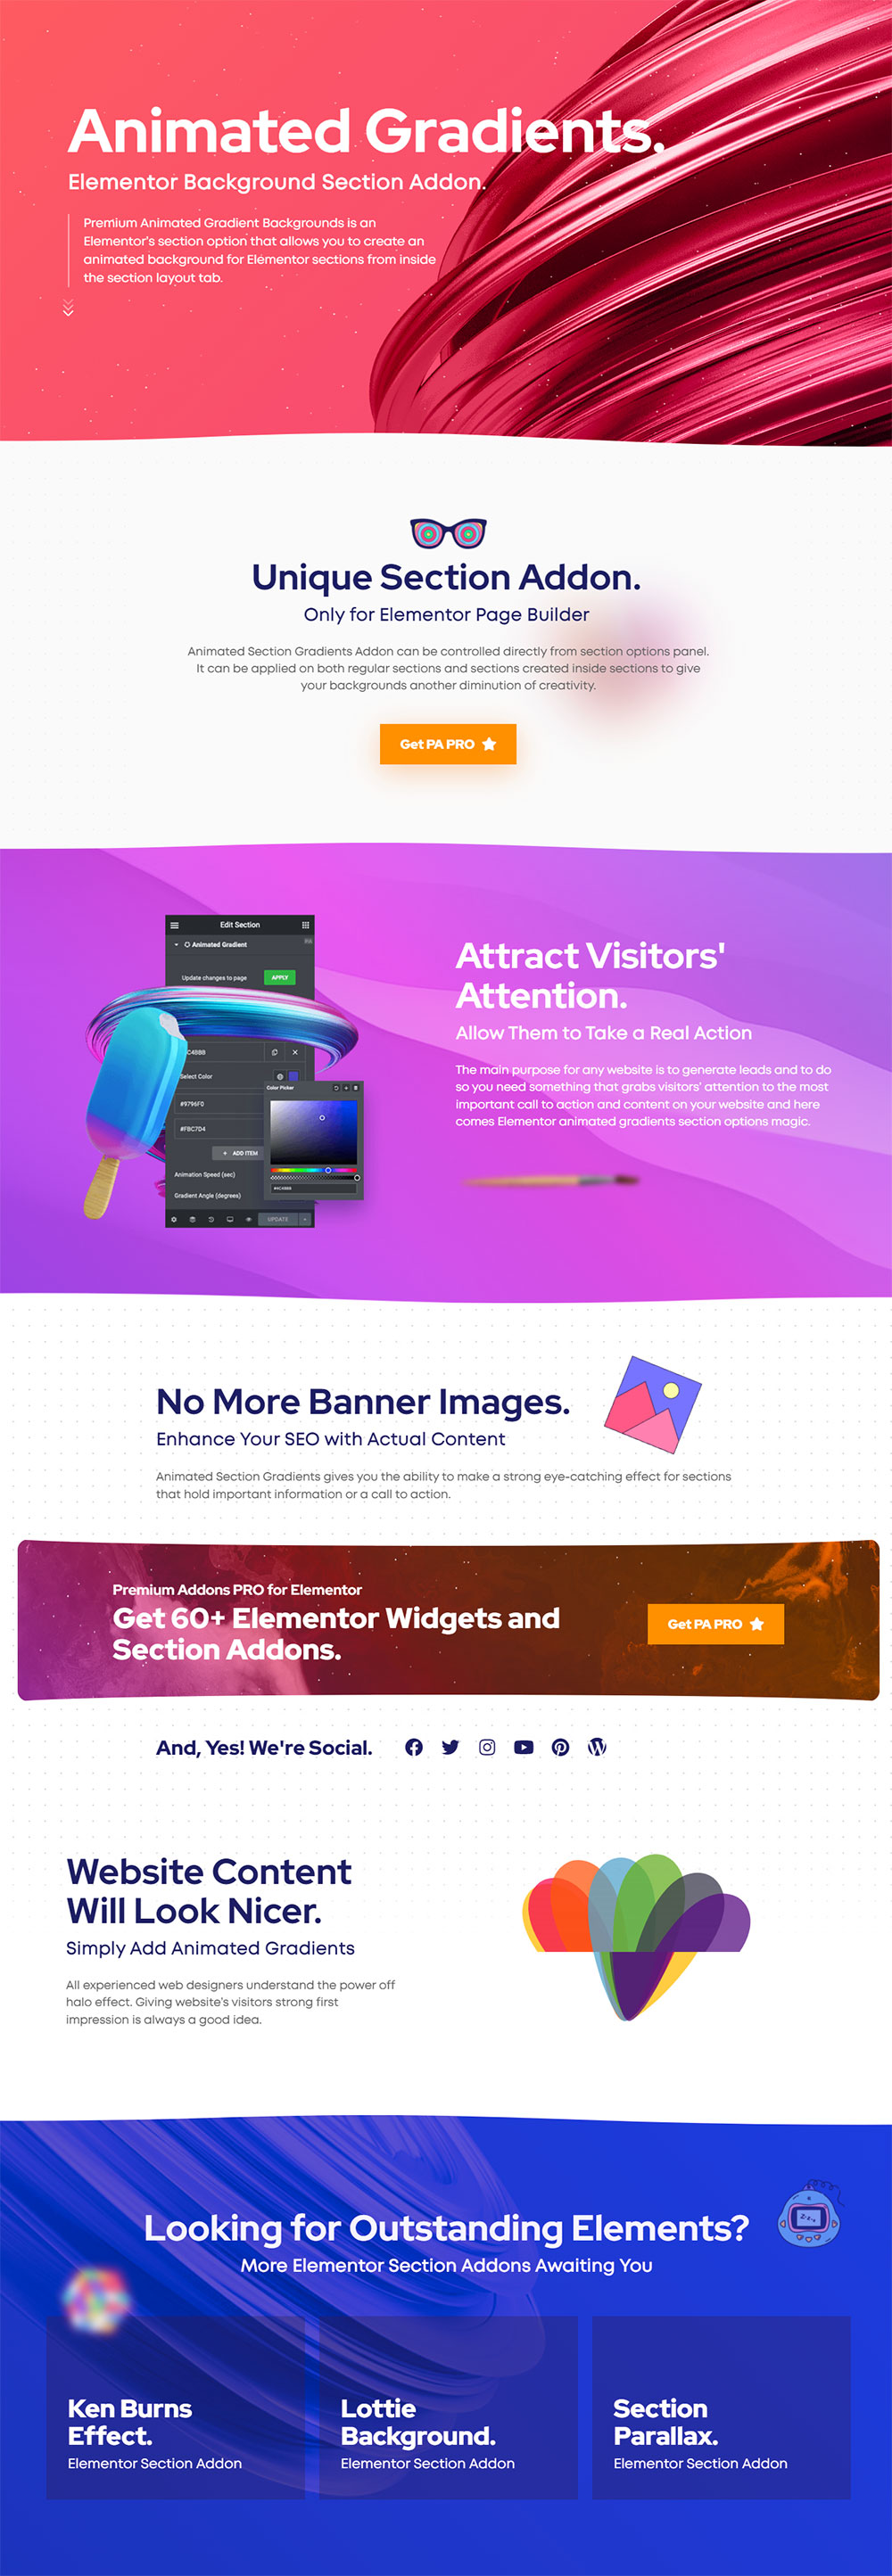 Animated Gradient - Official Elementor Addons, Plugins and Widgets